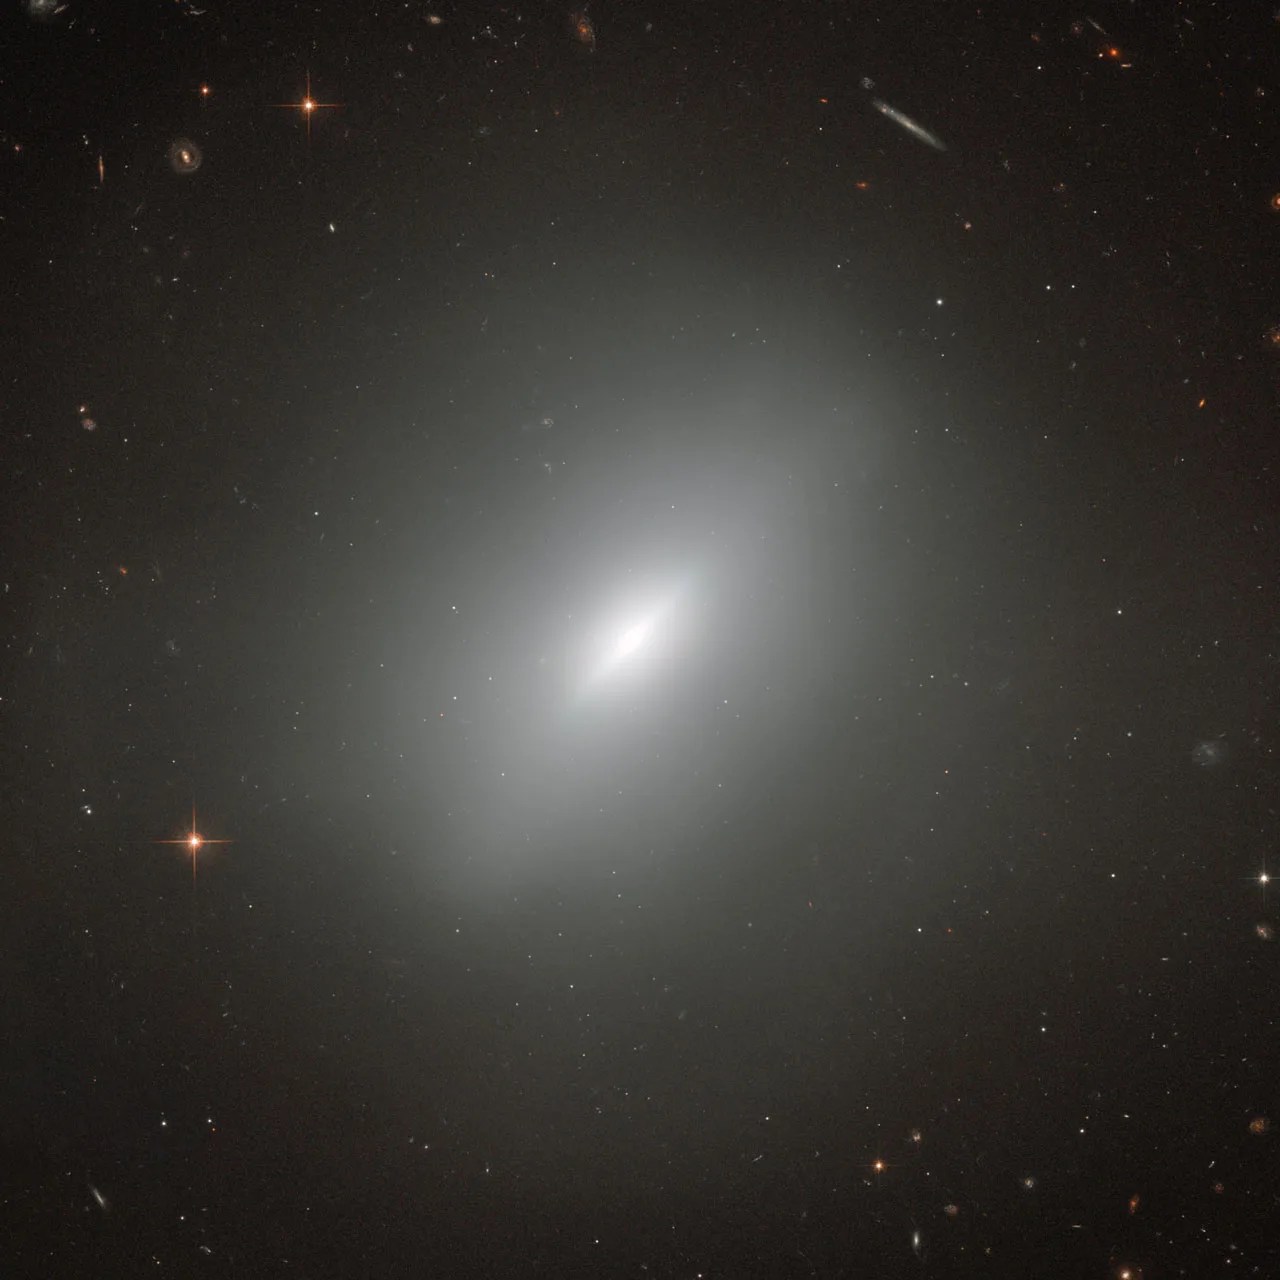 The elliptical galaxy ngc 3610 surrounding by a wealth of other galaxies of all shapes